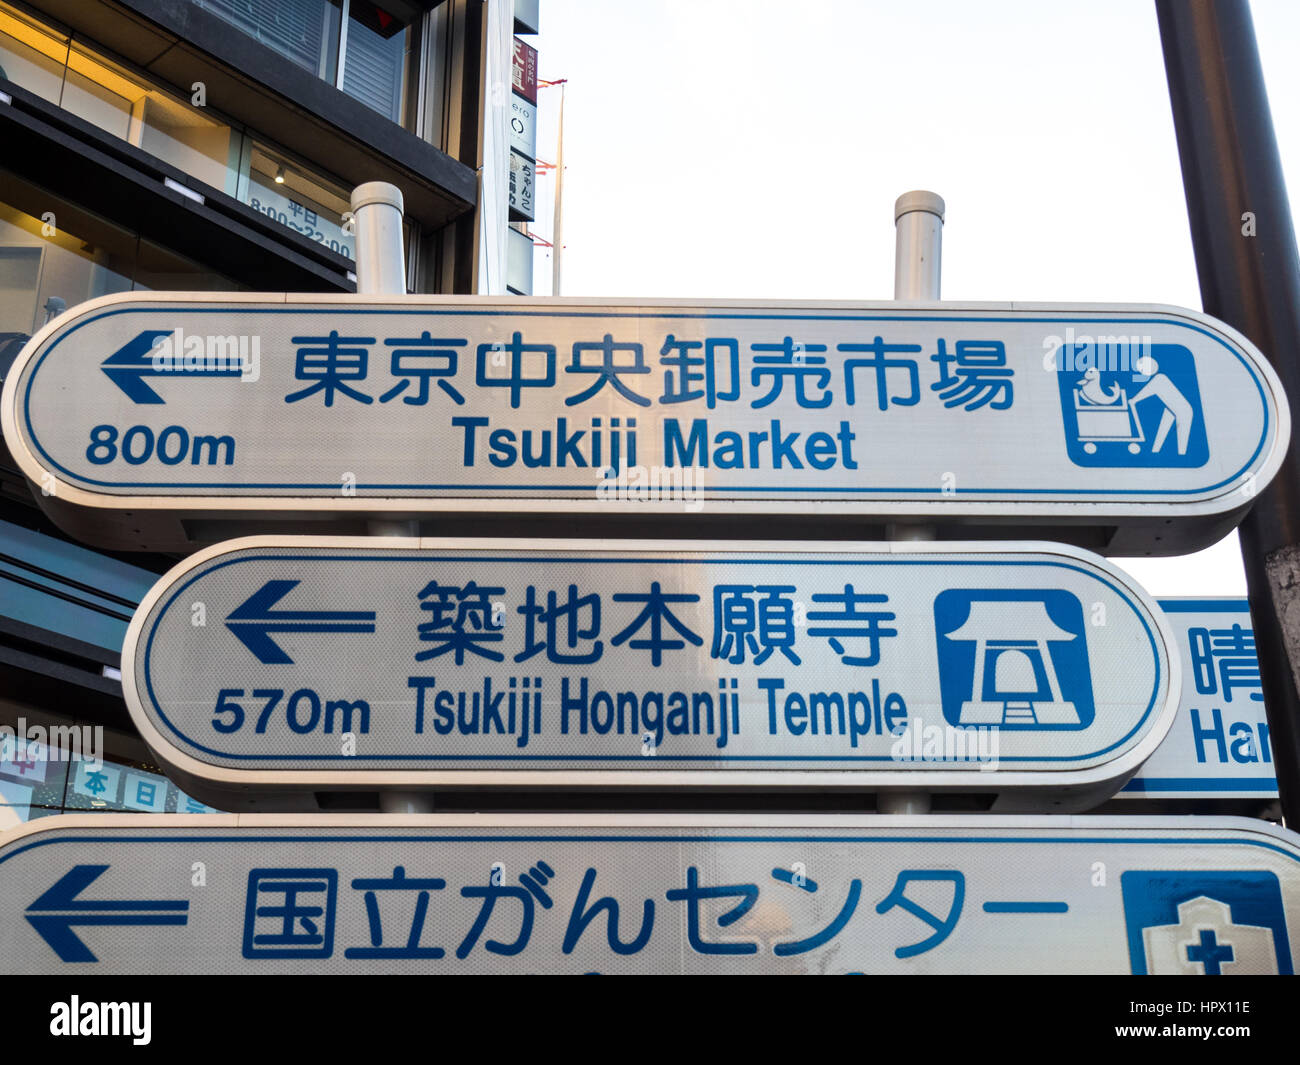 Two street signs, one for the Tsukiji Markets commonly known as the Tokyo Fish Markets, and Tsukiji Honganji Temple. Stock Photo